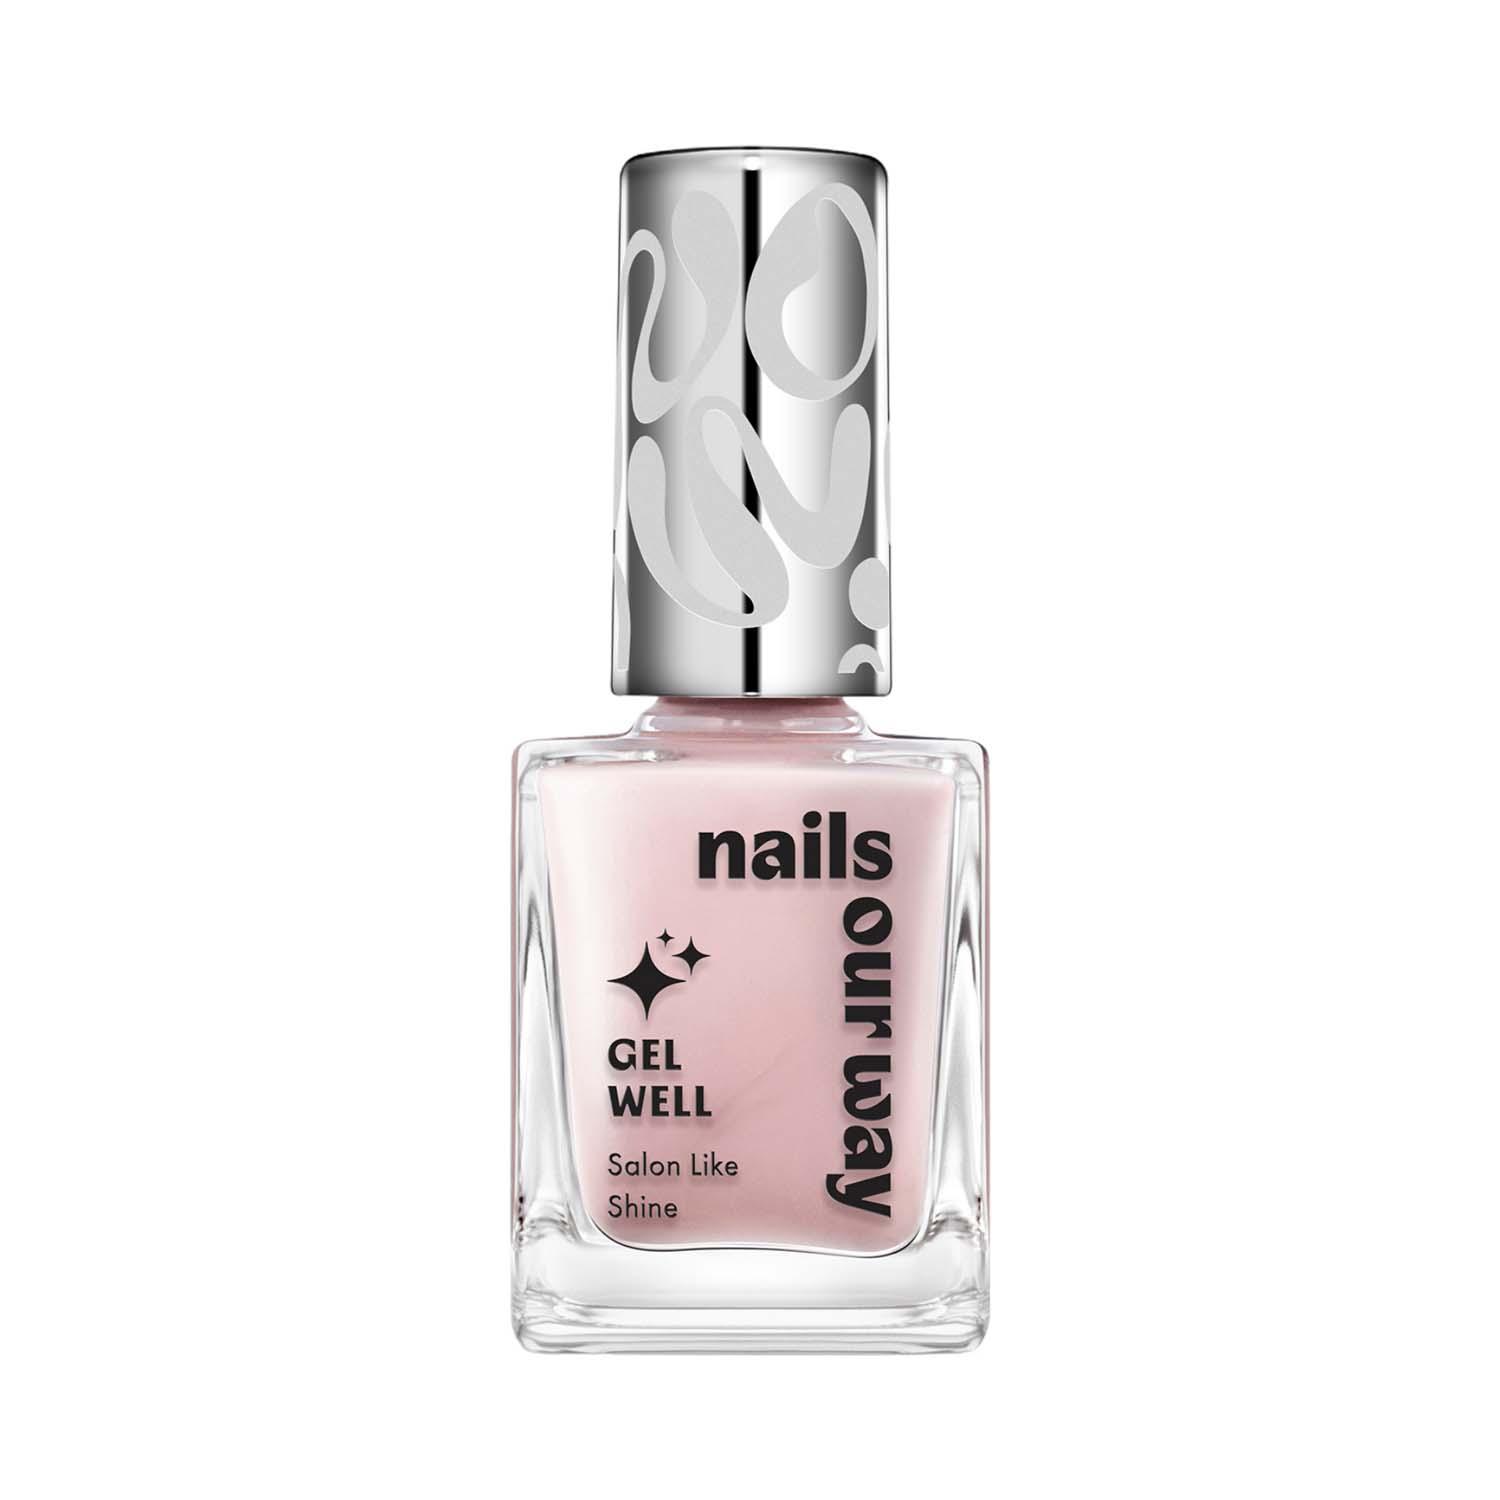 Nails Our Way | Nails Our Way Gel Well Nail Enamel - 201 Charismatic (10 ml)